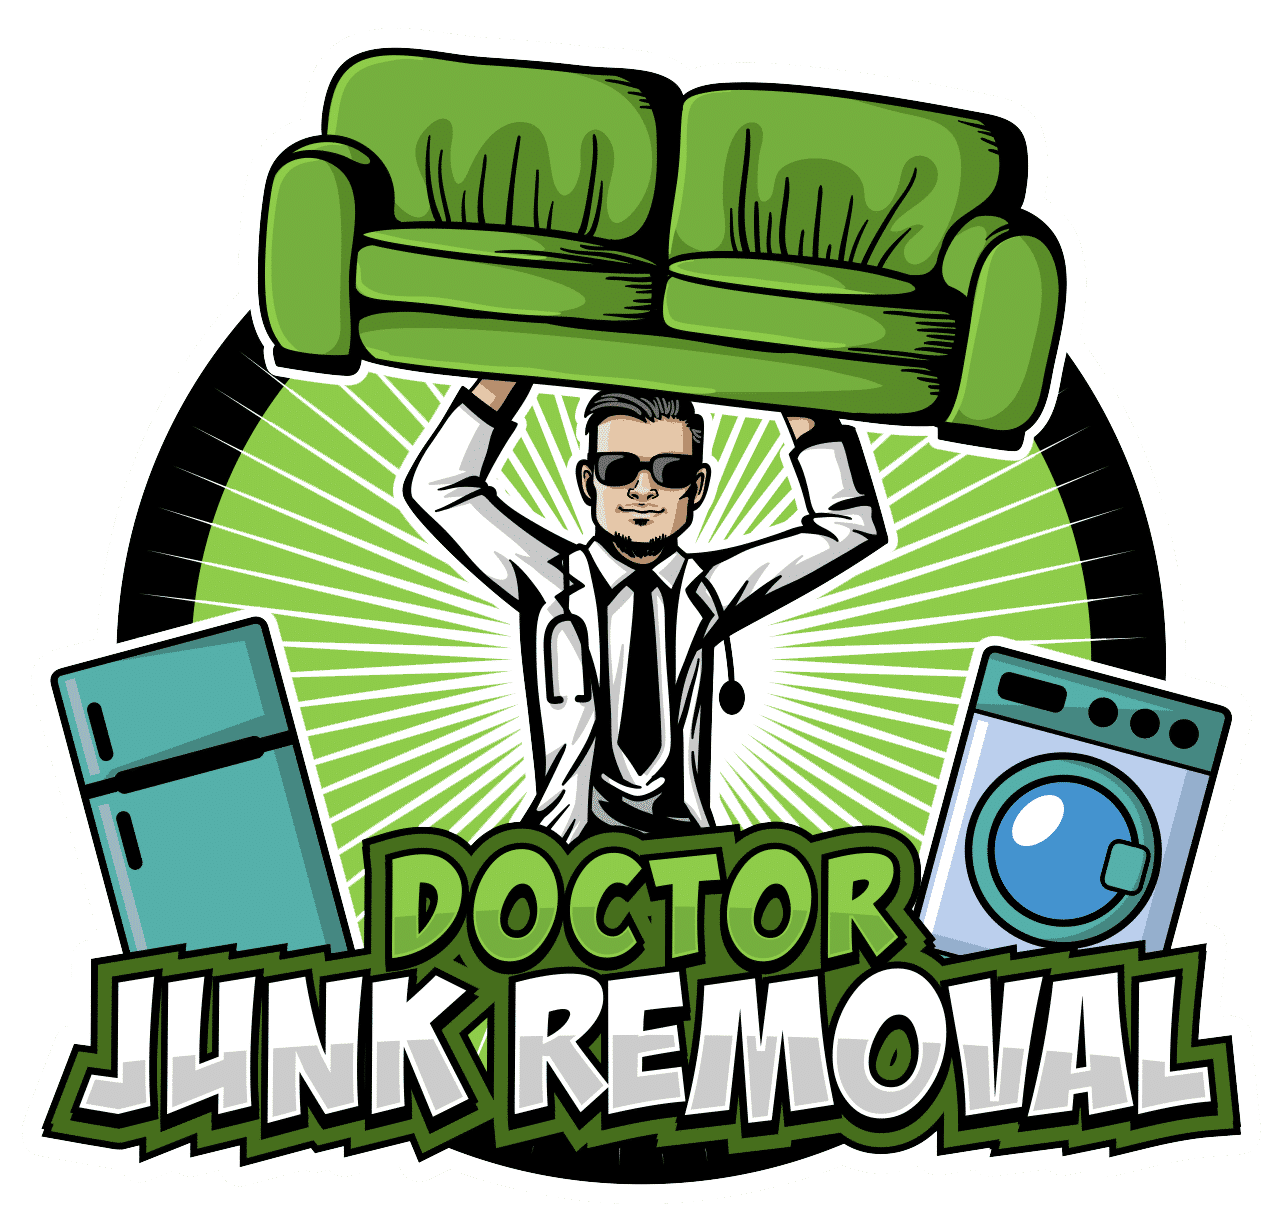 Doctor Junk removal Services Company LOGO